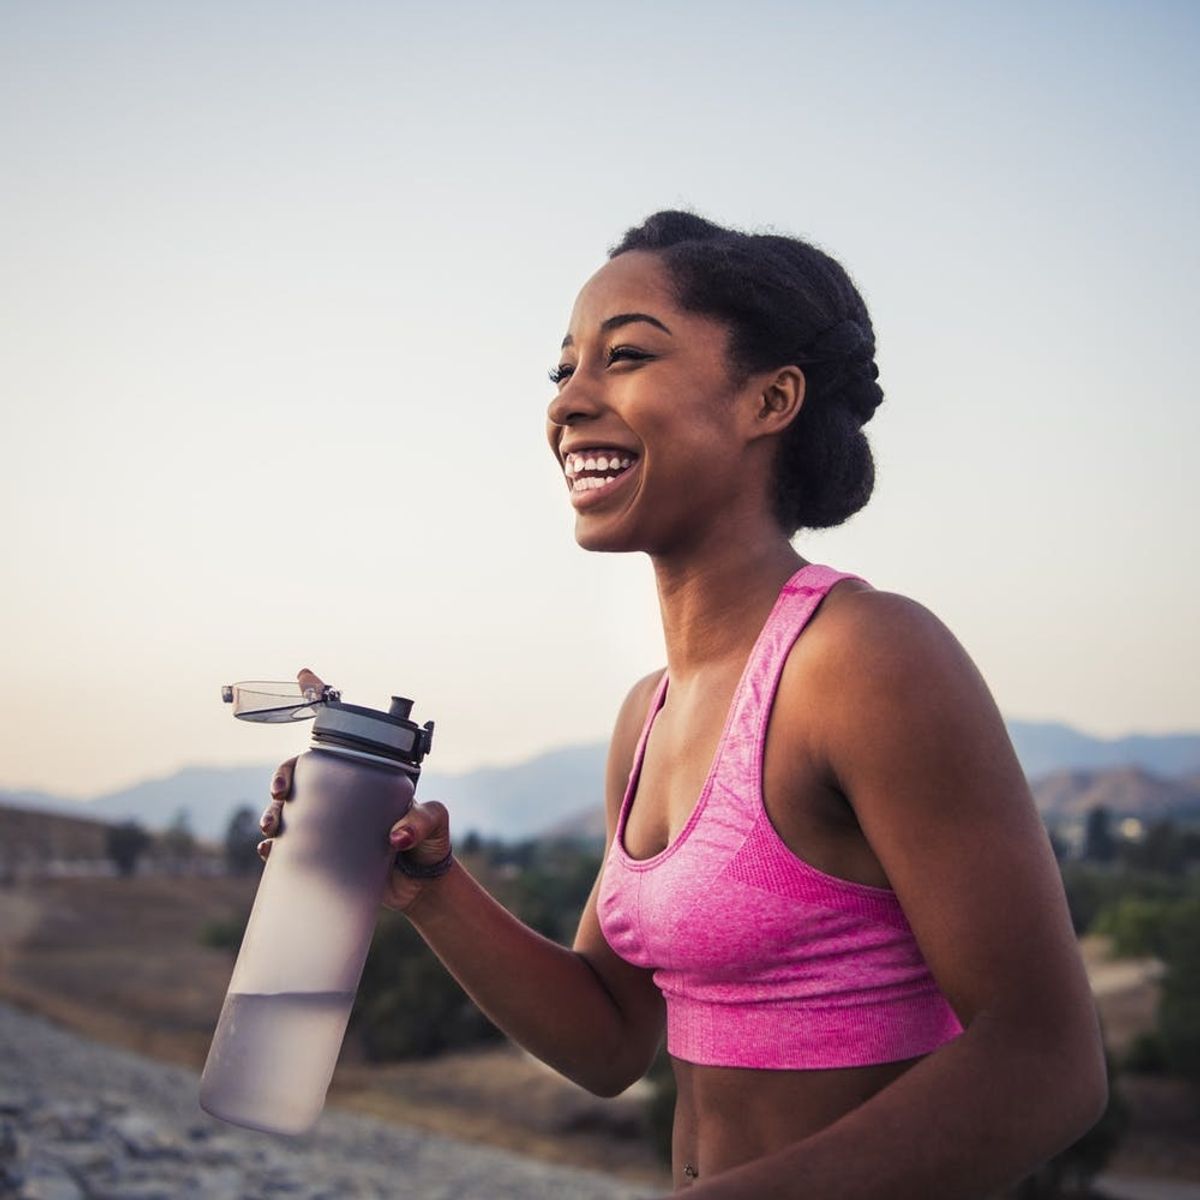 7 New Year’s Resolutions That Aren’t About Weight Loss (But Might Make It Happen Anyway)